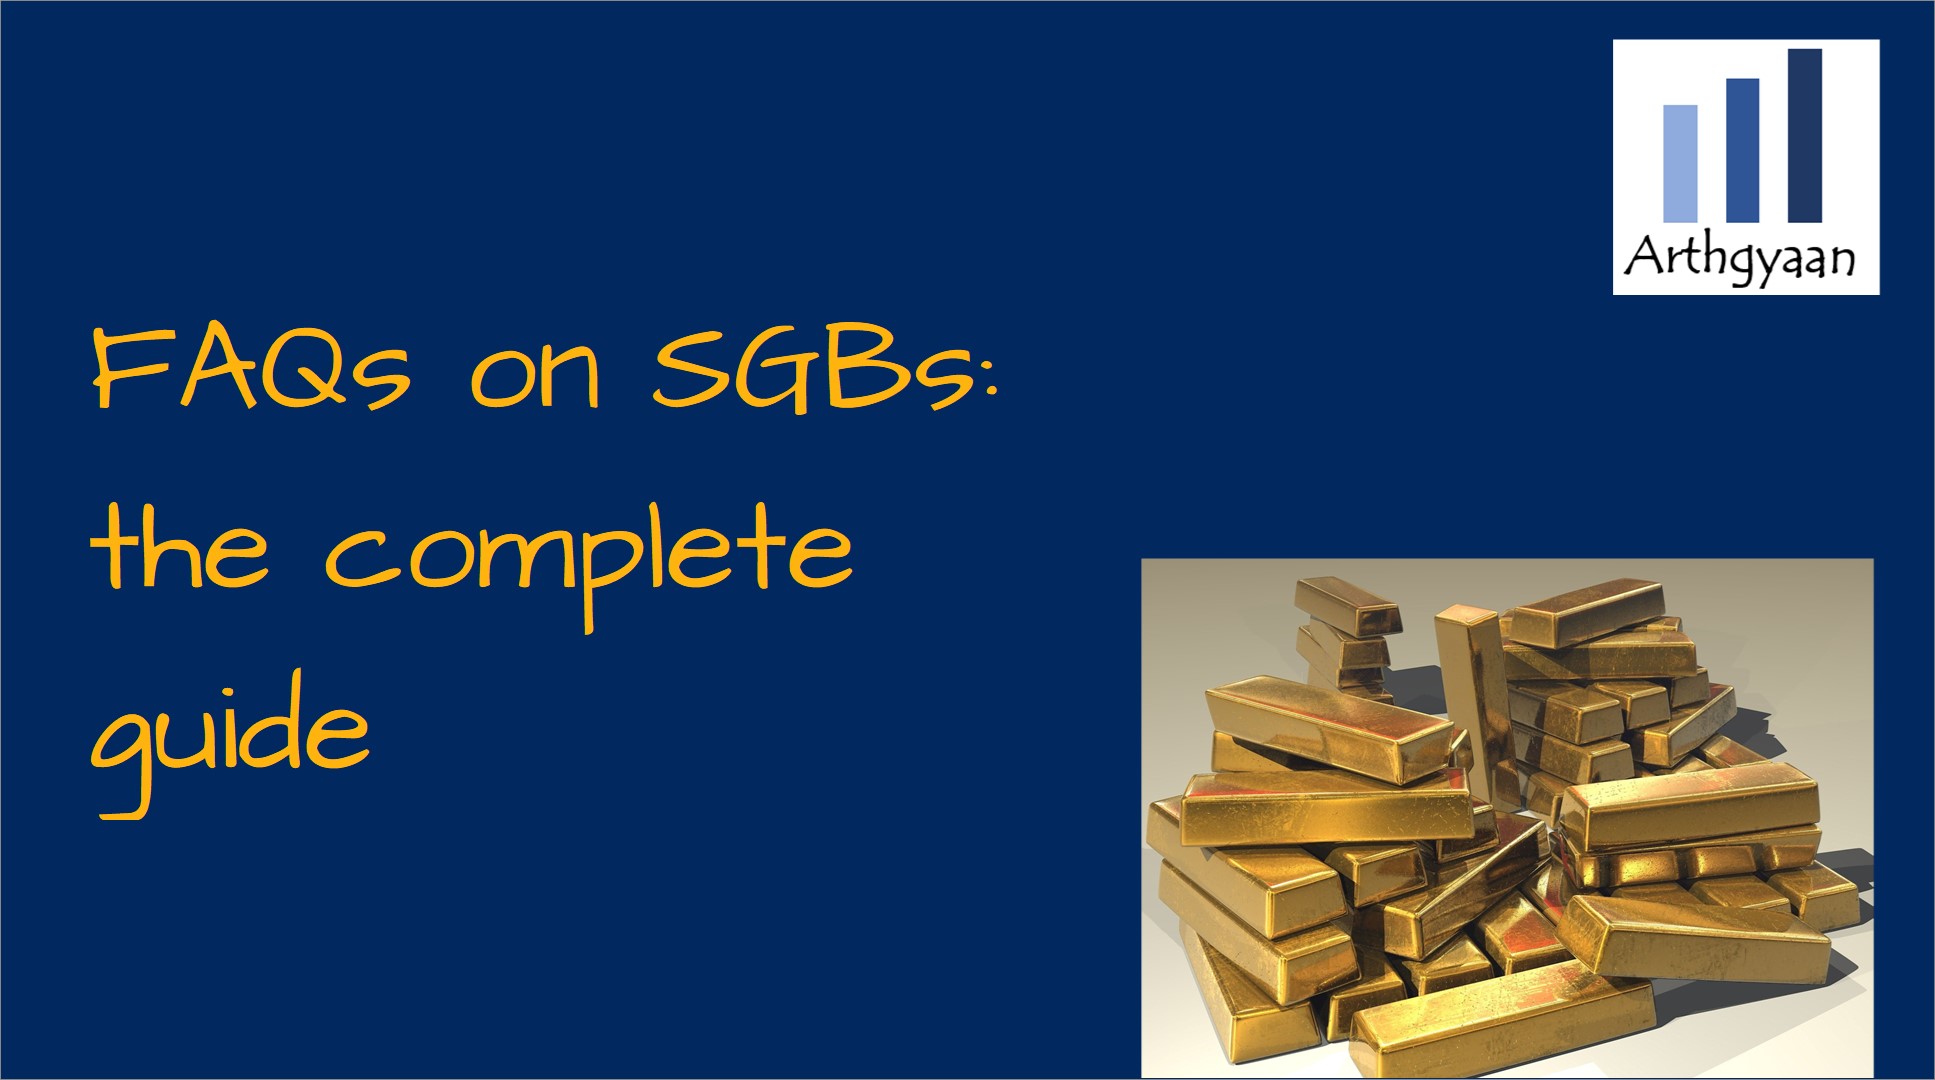 Frequently asked questions on Sovereign Gold Bonds (SGB): the complete guide